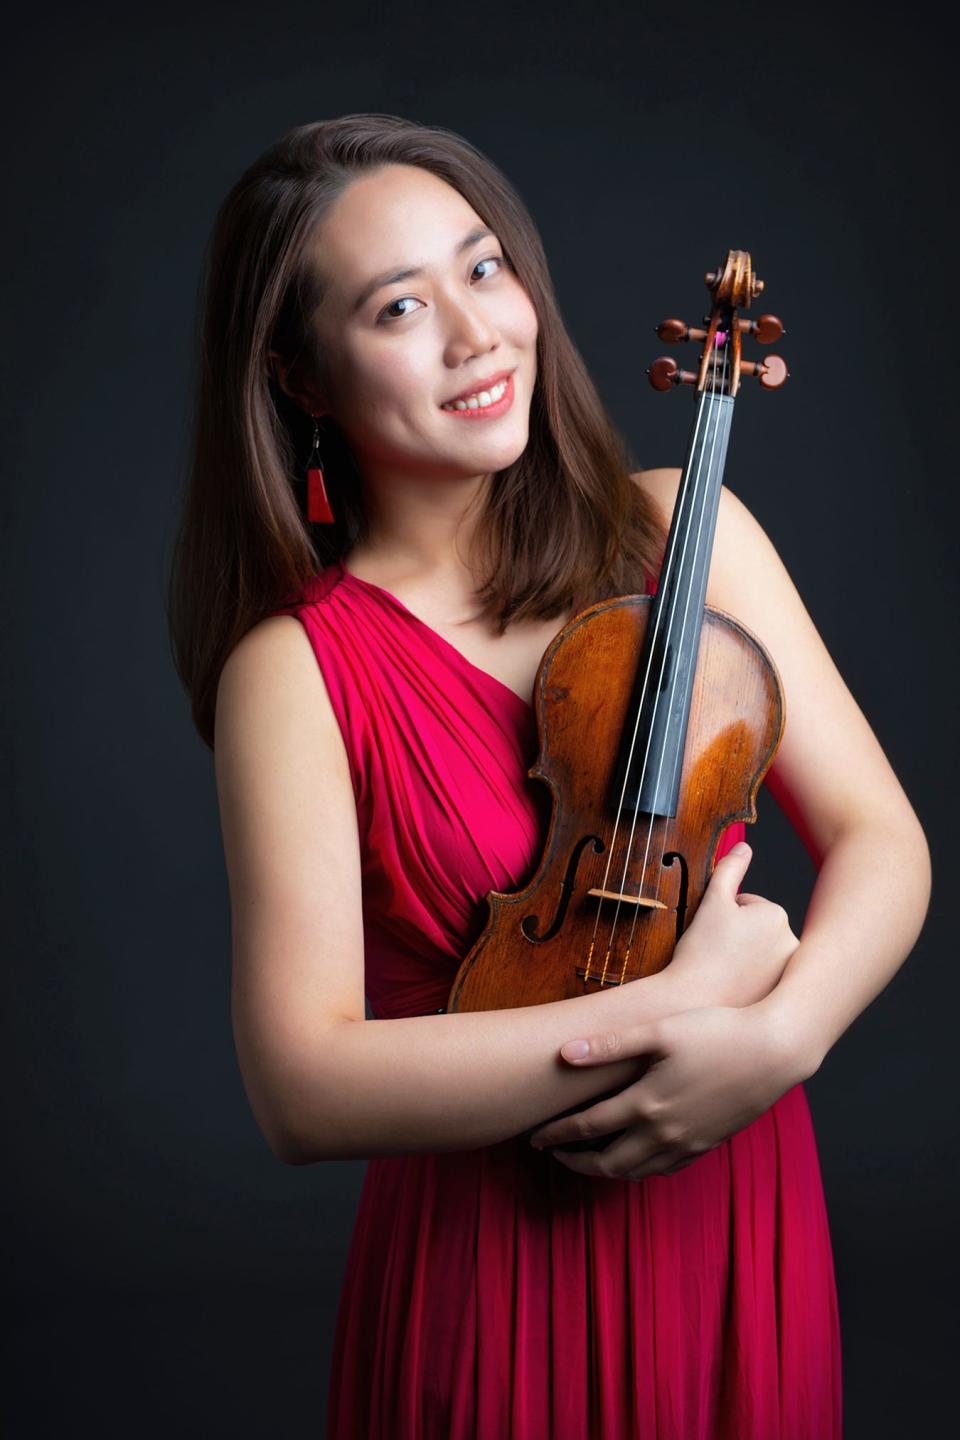 Cape Cod Chamber Orchestra Concertmaster Jean Huang will be the featured violinist Sunday for the "Lark Ascending" concert.